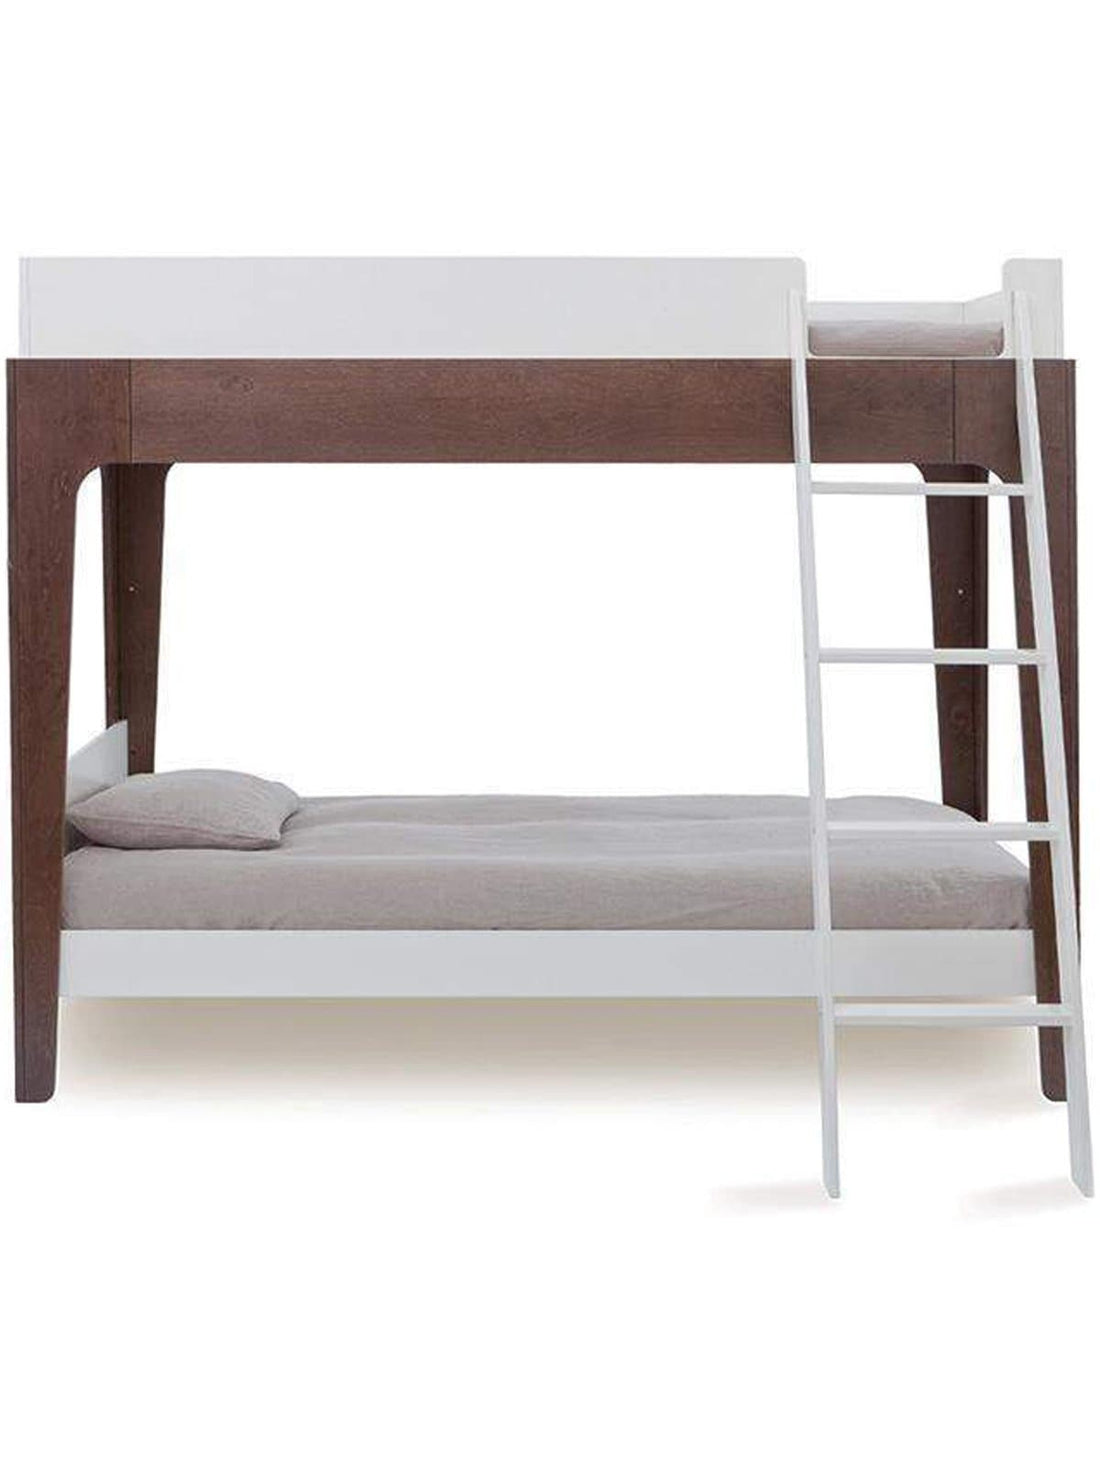 PERCH COLLECTION BUNK BED, WALNUT - Norman & Jules